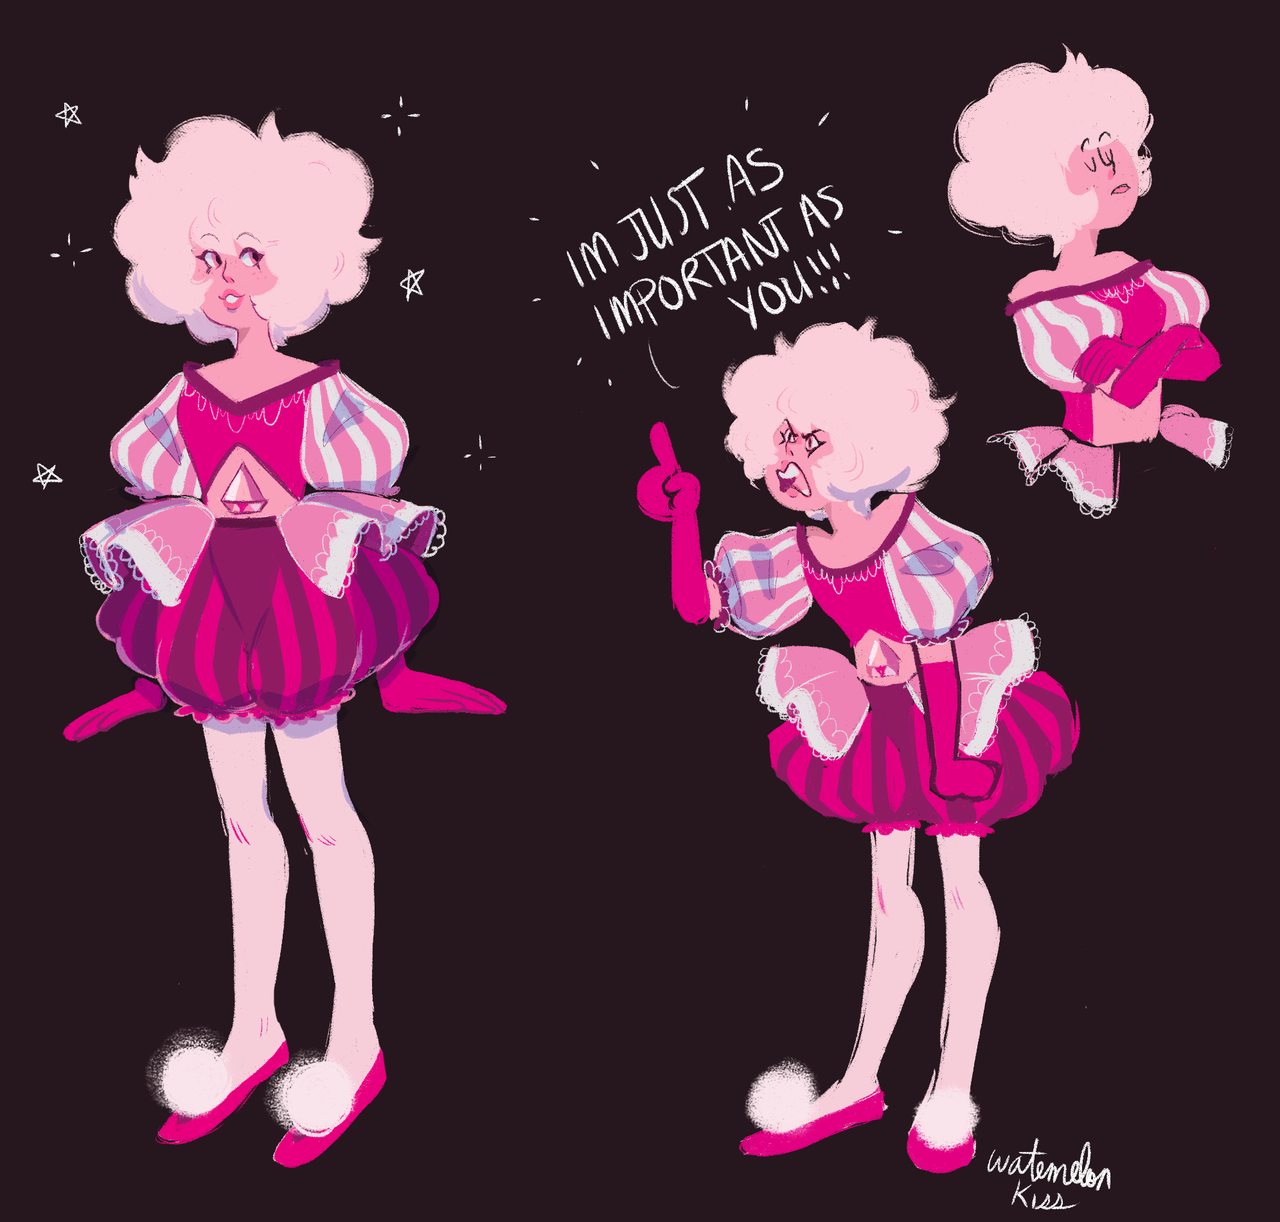 these are from back when a single pale rose aired,,,it took me a while to warm up to pink but i saw someone add stripes to her outfit and idk,, she looks like a clown but shes cute